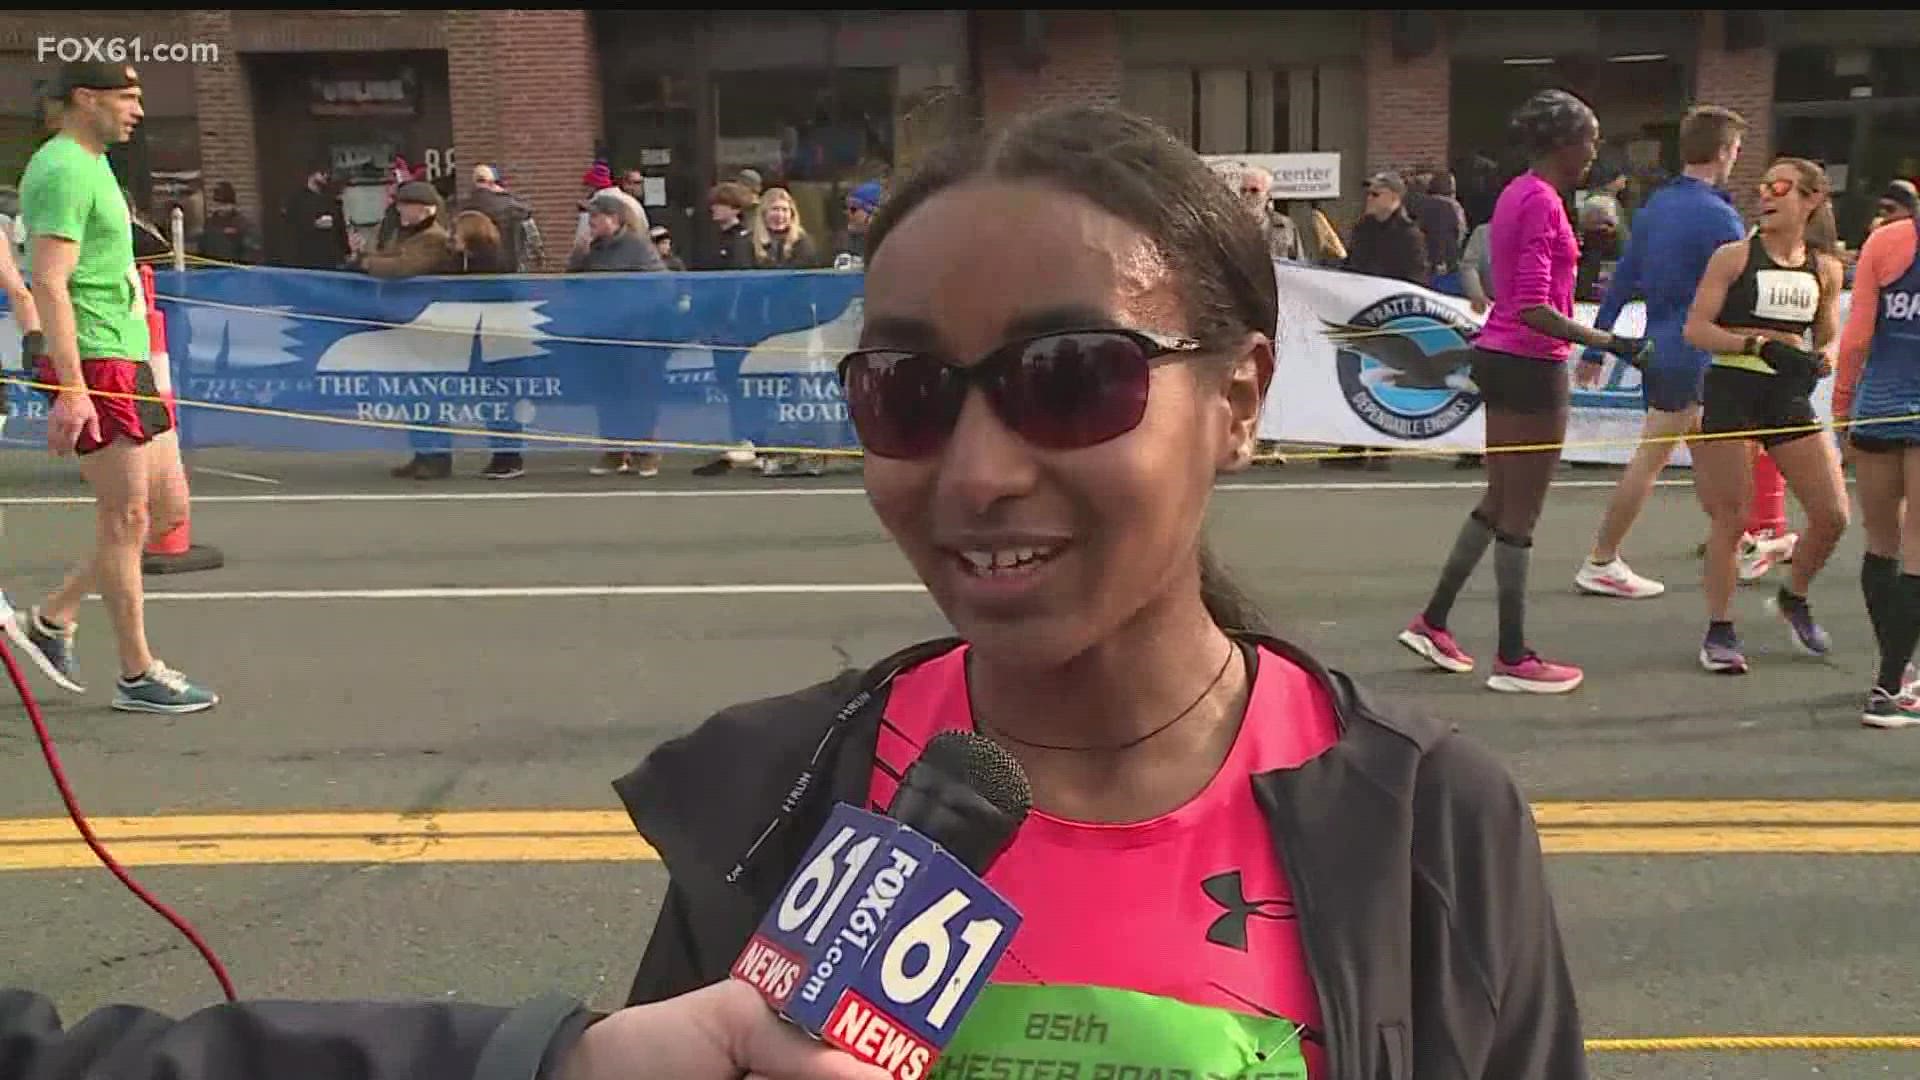 Weini Kelati finished first for the women's time at the Manchester Road Race and beat the time record.